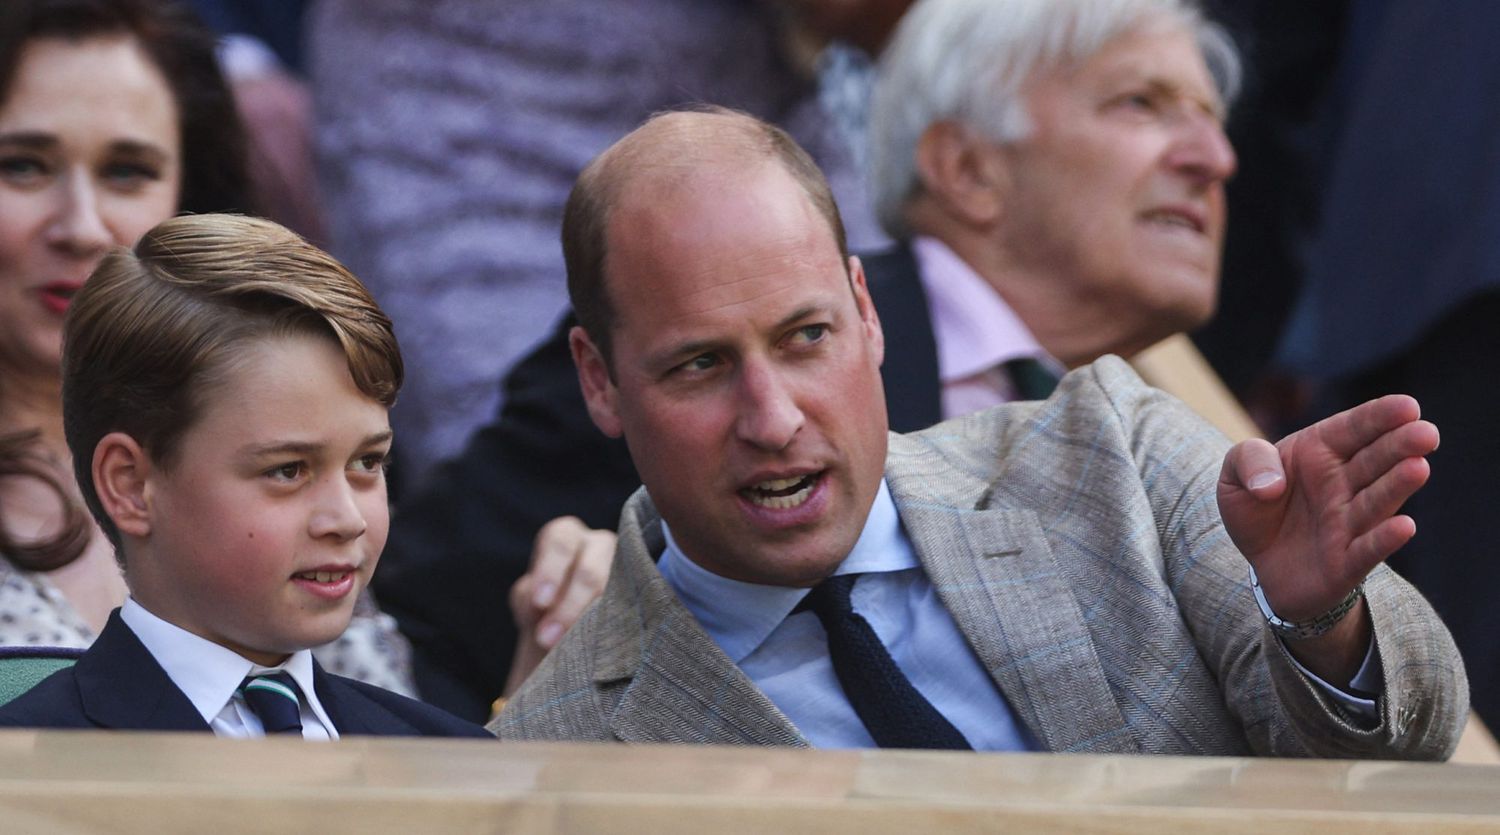 Britain's Prince William, Duke of Cambridge (R) talks to his son Prince George as they attend the men's singles final tennis match between Serbia's Novak Djokovic and Australia's Nick Kyrgios on the fourteenth day of the 2022 Wimbledon Championships at The All England Tennis Club in Wimbledon, southwest London, on July 10, 2022. - RESTRICTED TO EDITORIAL USE (Photo by Adrian DENNIS / AFP) / RESTRICTED TO EDITORIAL USE (Photo by ADRIAN DENNIS/AFP via Getty Images)